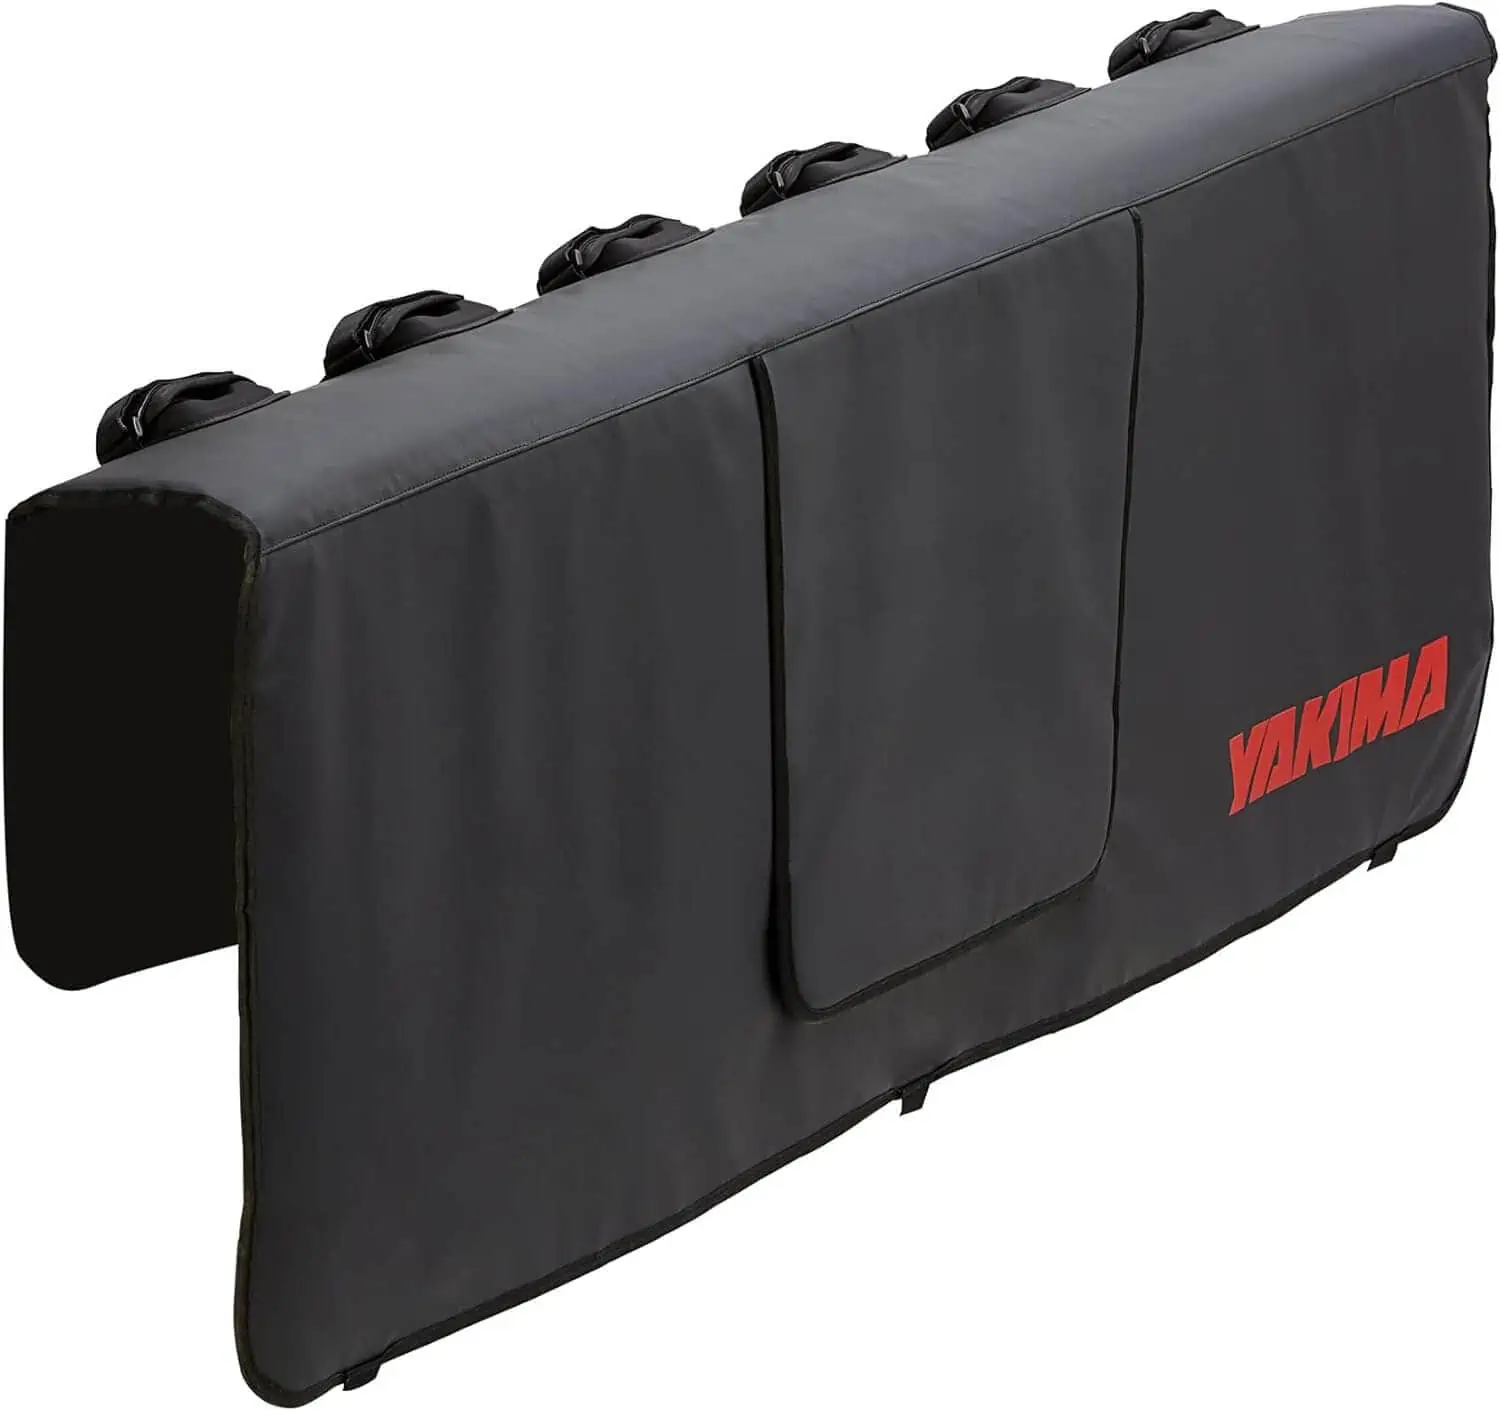 Yakima - GateKeeper Tailgate Pad for Compact Truck Beds